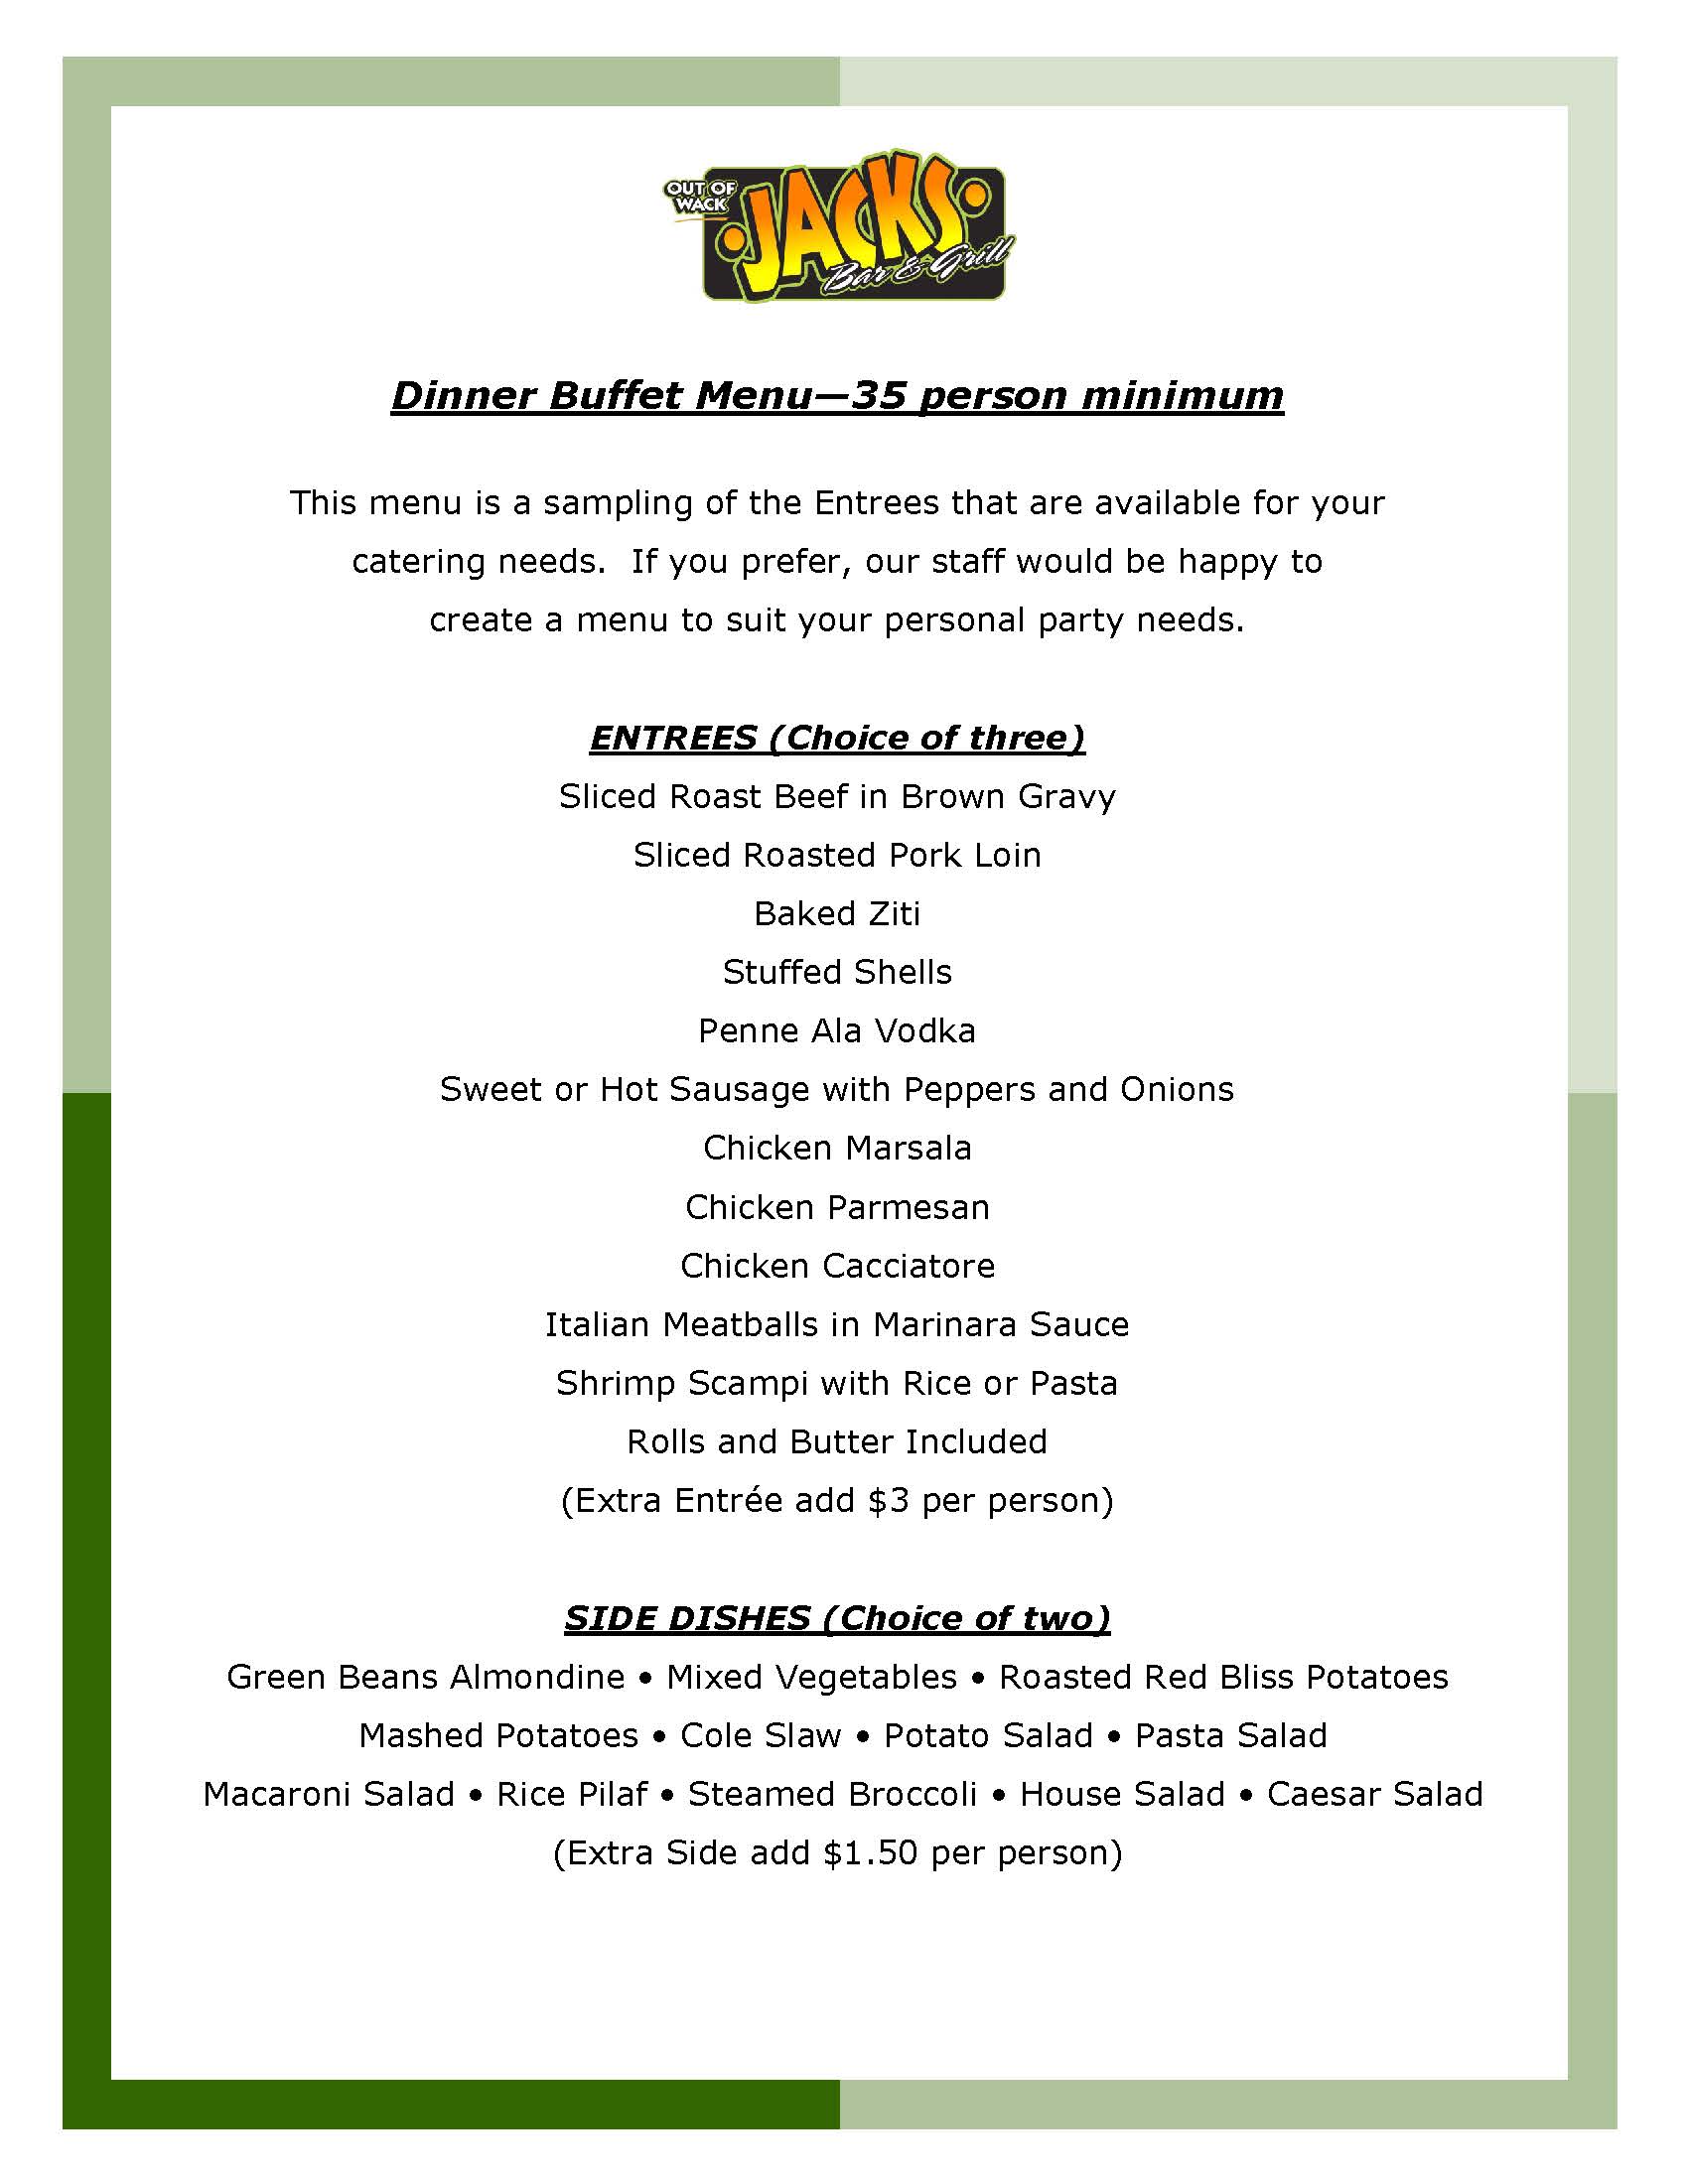 A buffet menu from Jack's requiring a 35 person minimum. It lists various entrees including pasta, chicken, and seafood, as well as side dish options like beans, mashed potatoes, and salad.